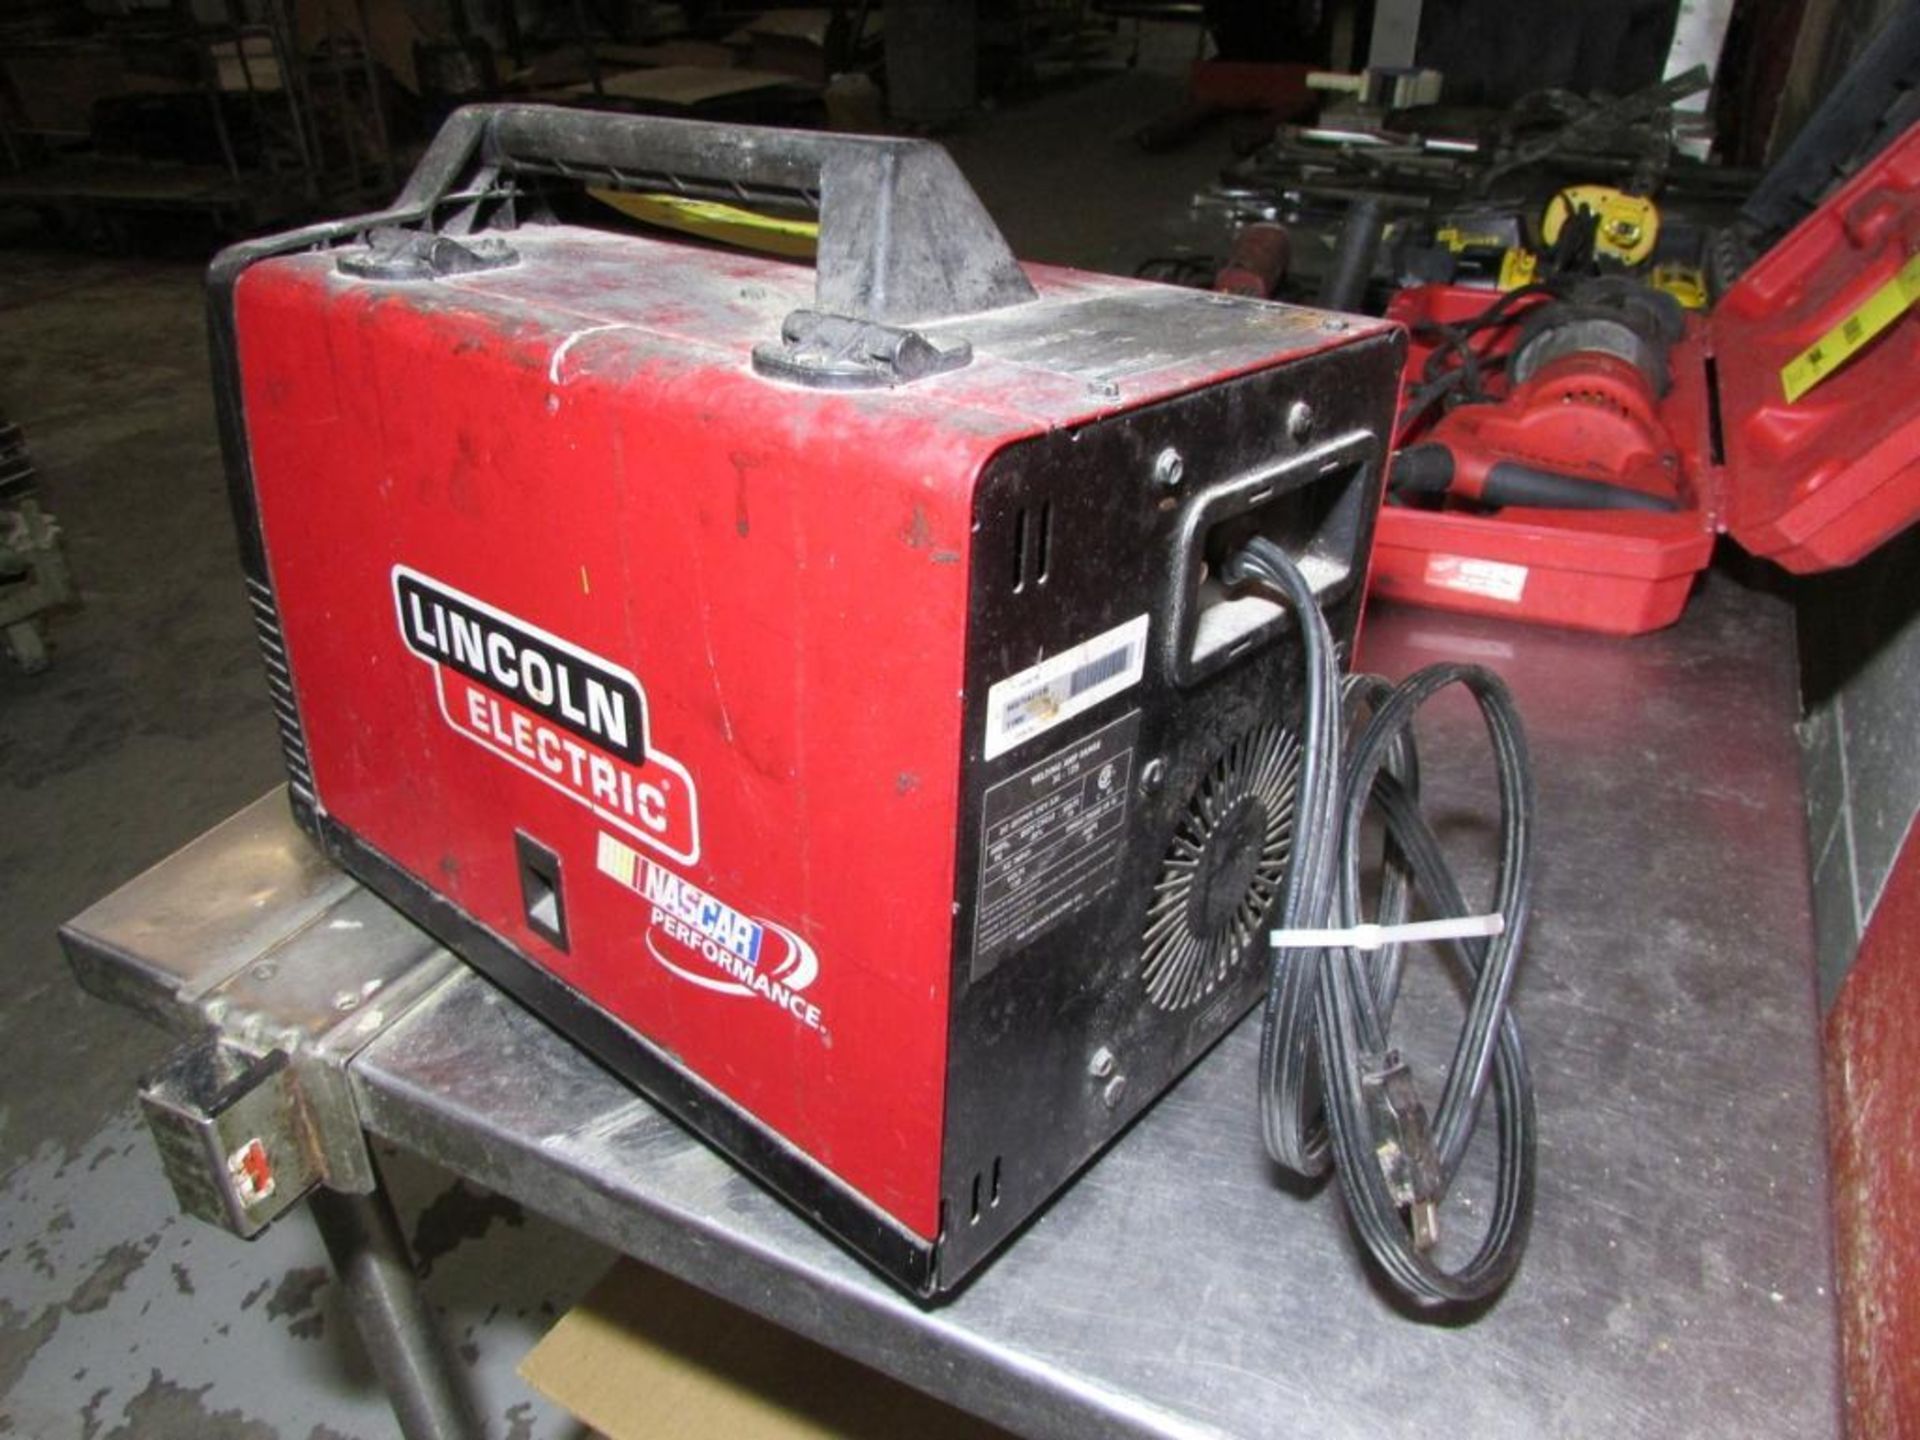 Lincoln Electric Pro Core 125 MIG Wire Welder. 30-125A, 90A 19V 20% Duty Cycle Output, 120V 20A 60Hz - Image 6 of 7